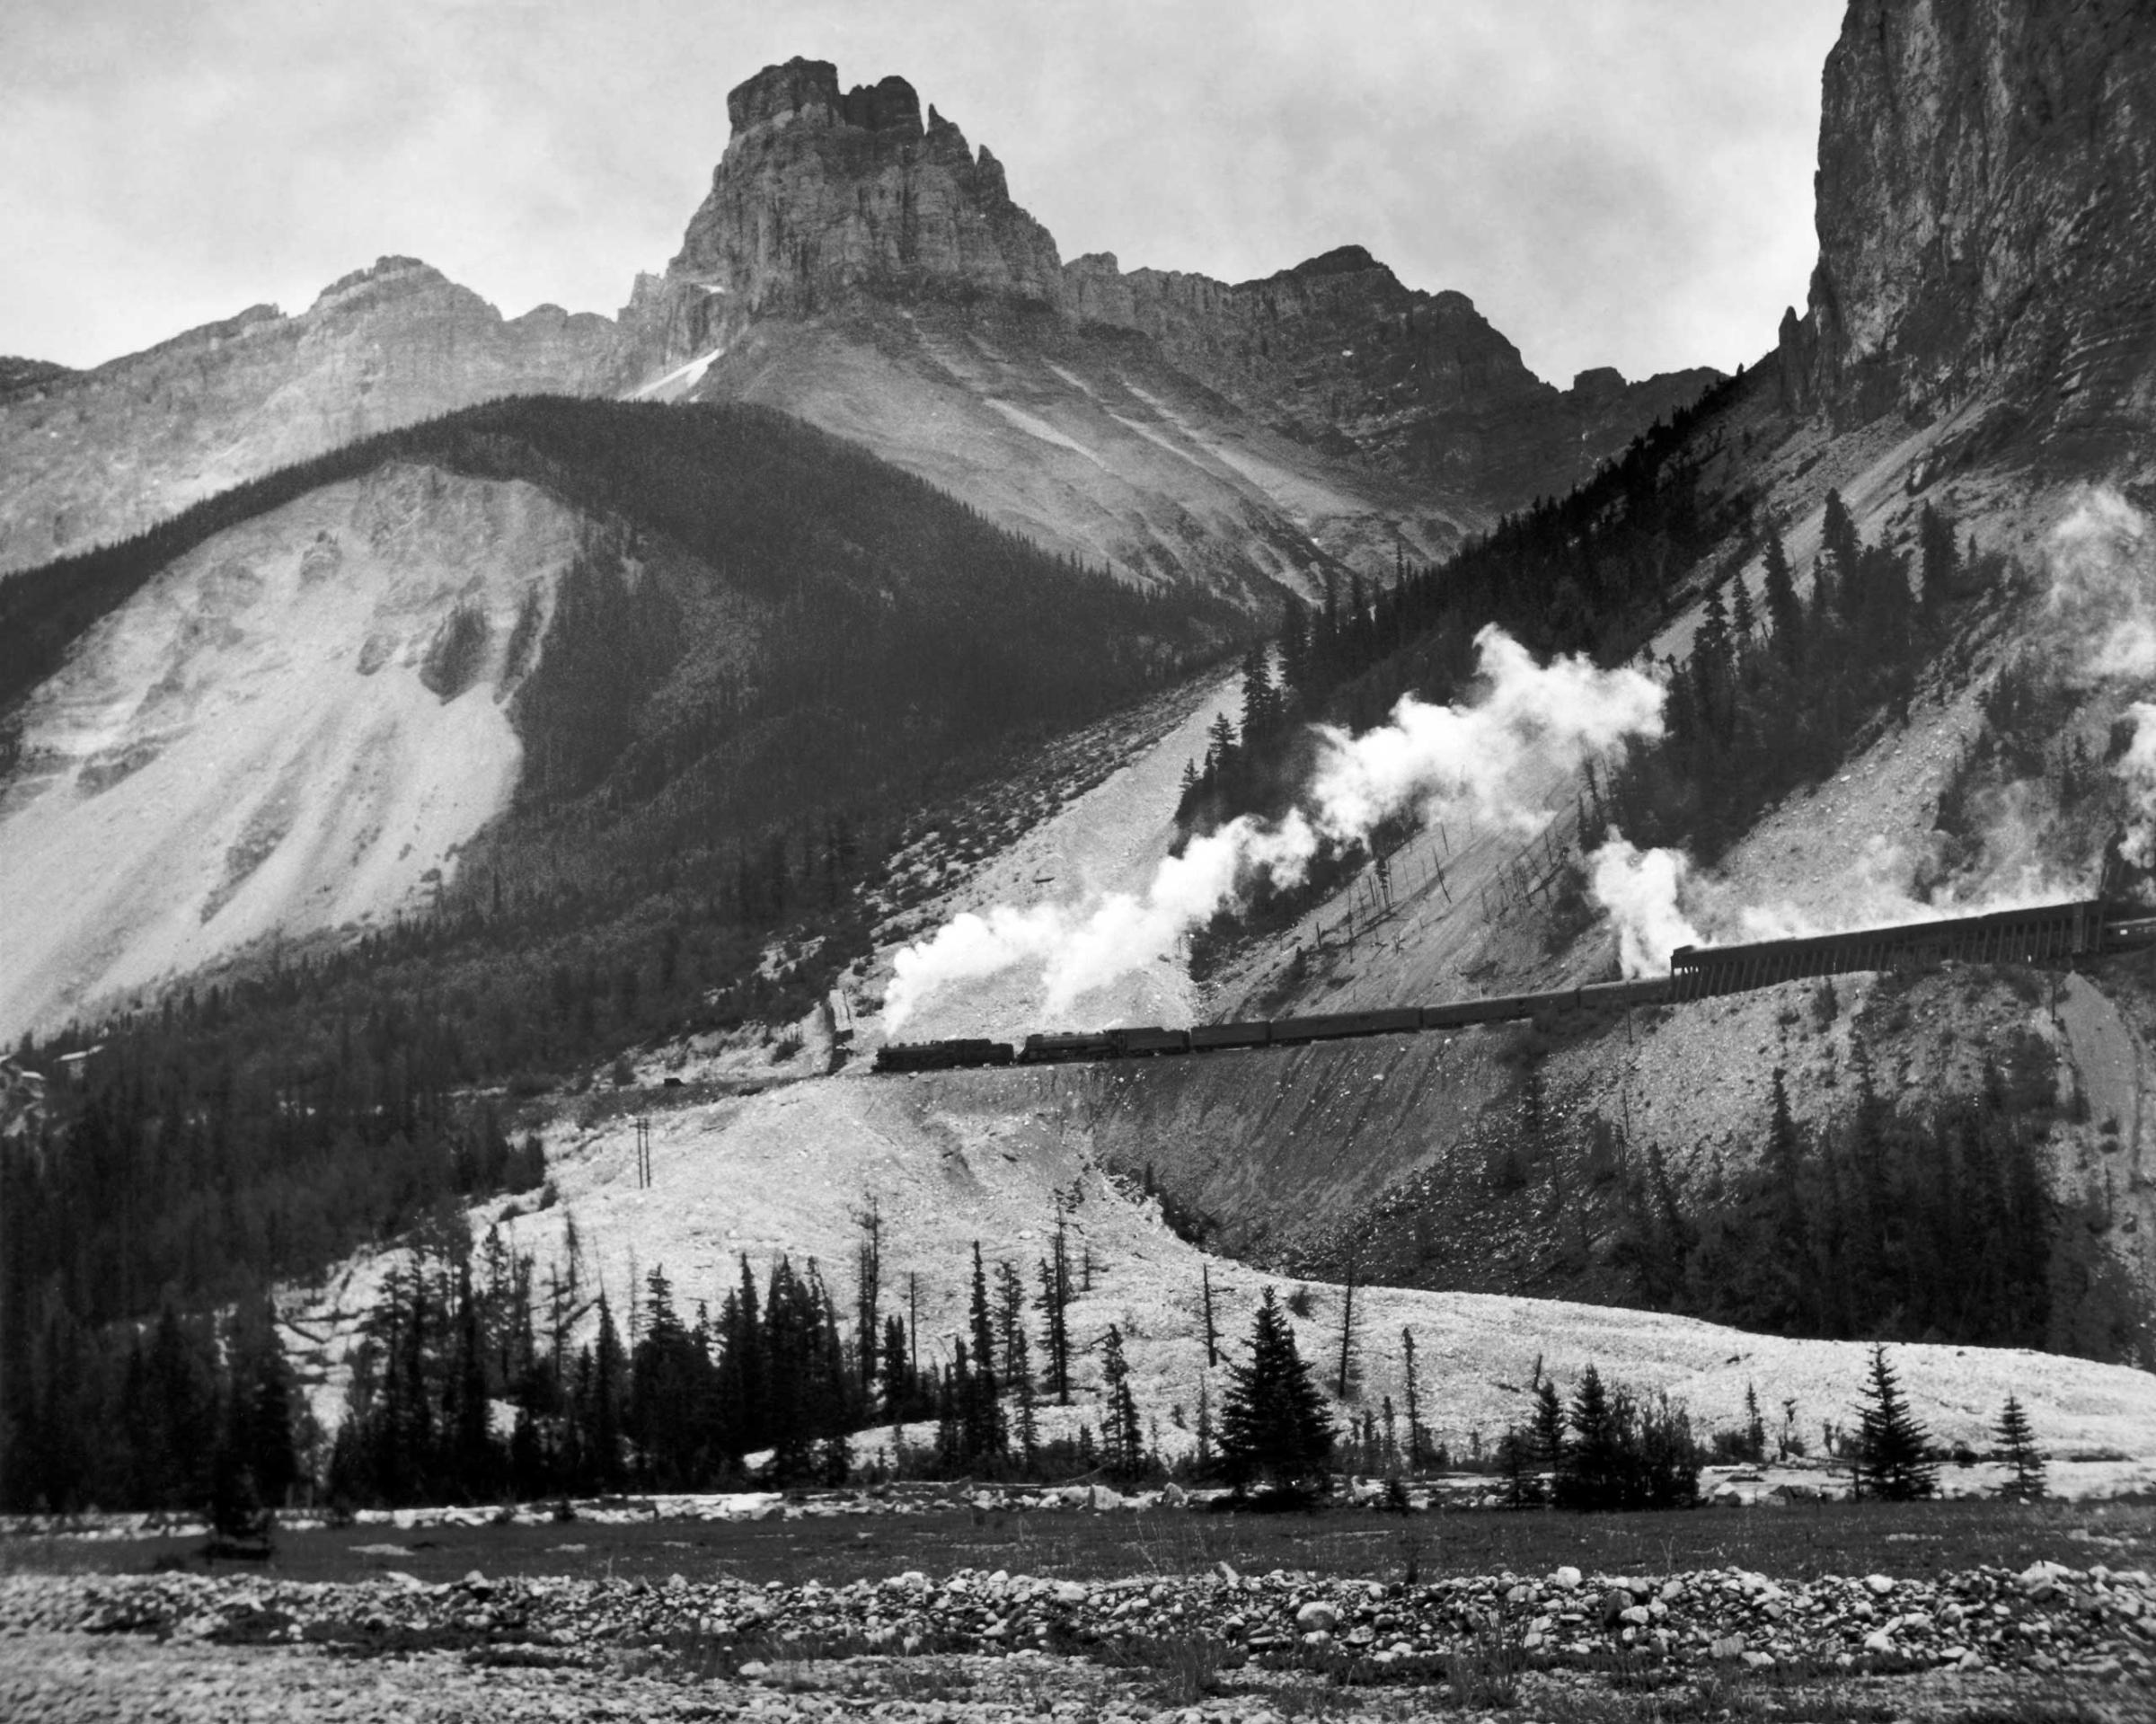 A freight train moves through the mountains of the President Range, Yoho National Park, British Columbia, Canada, 1951.